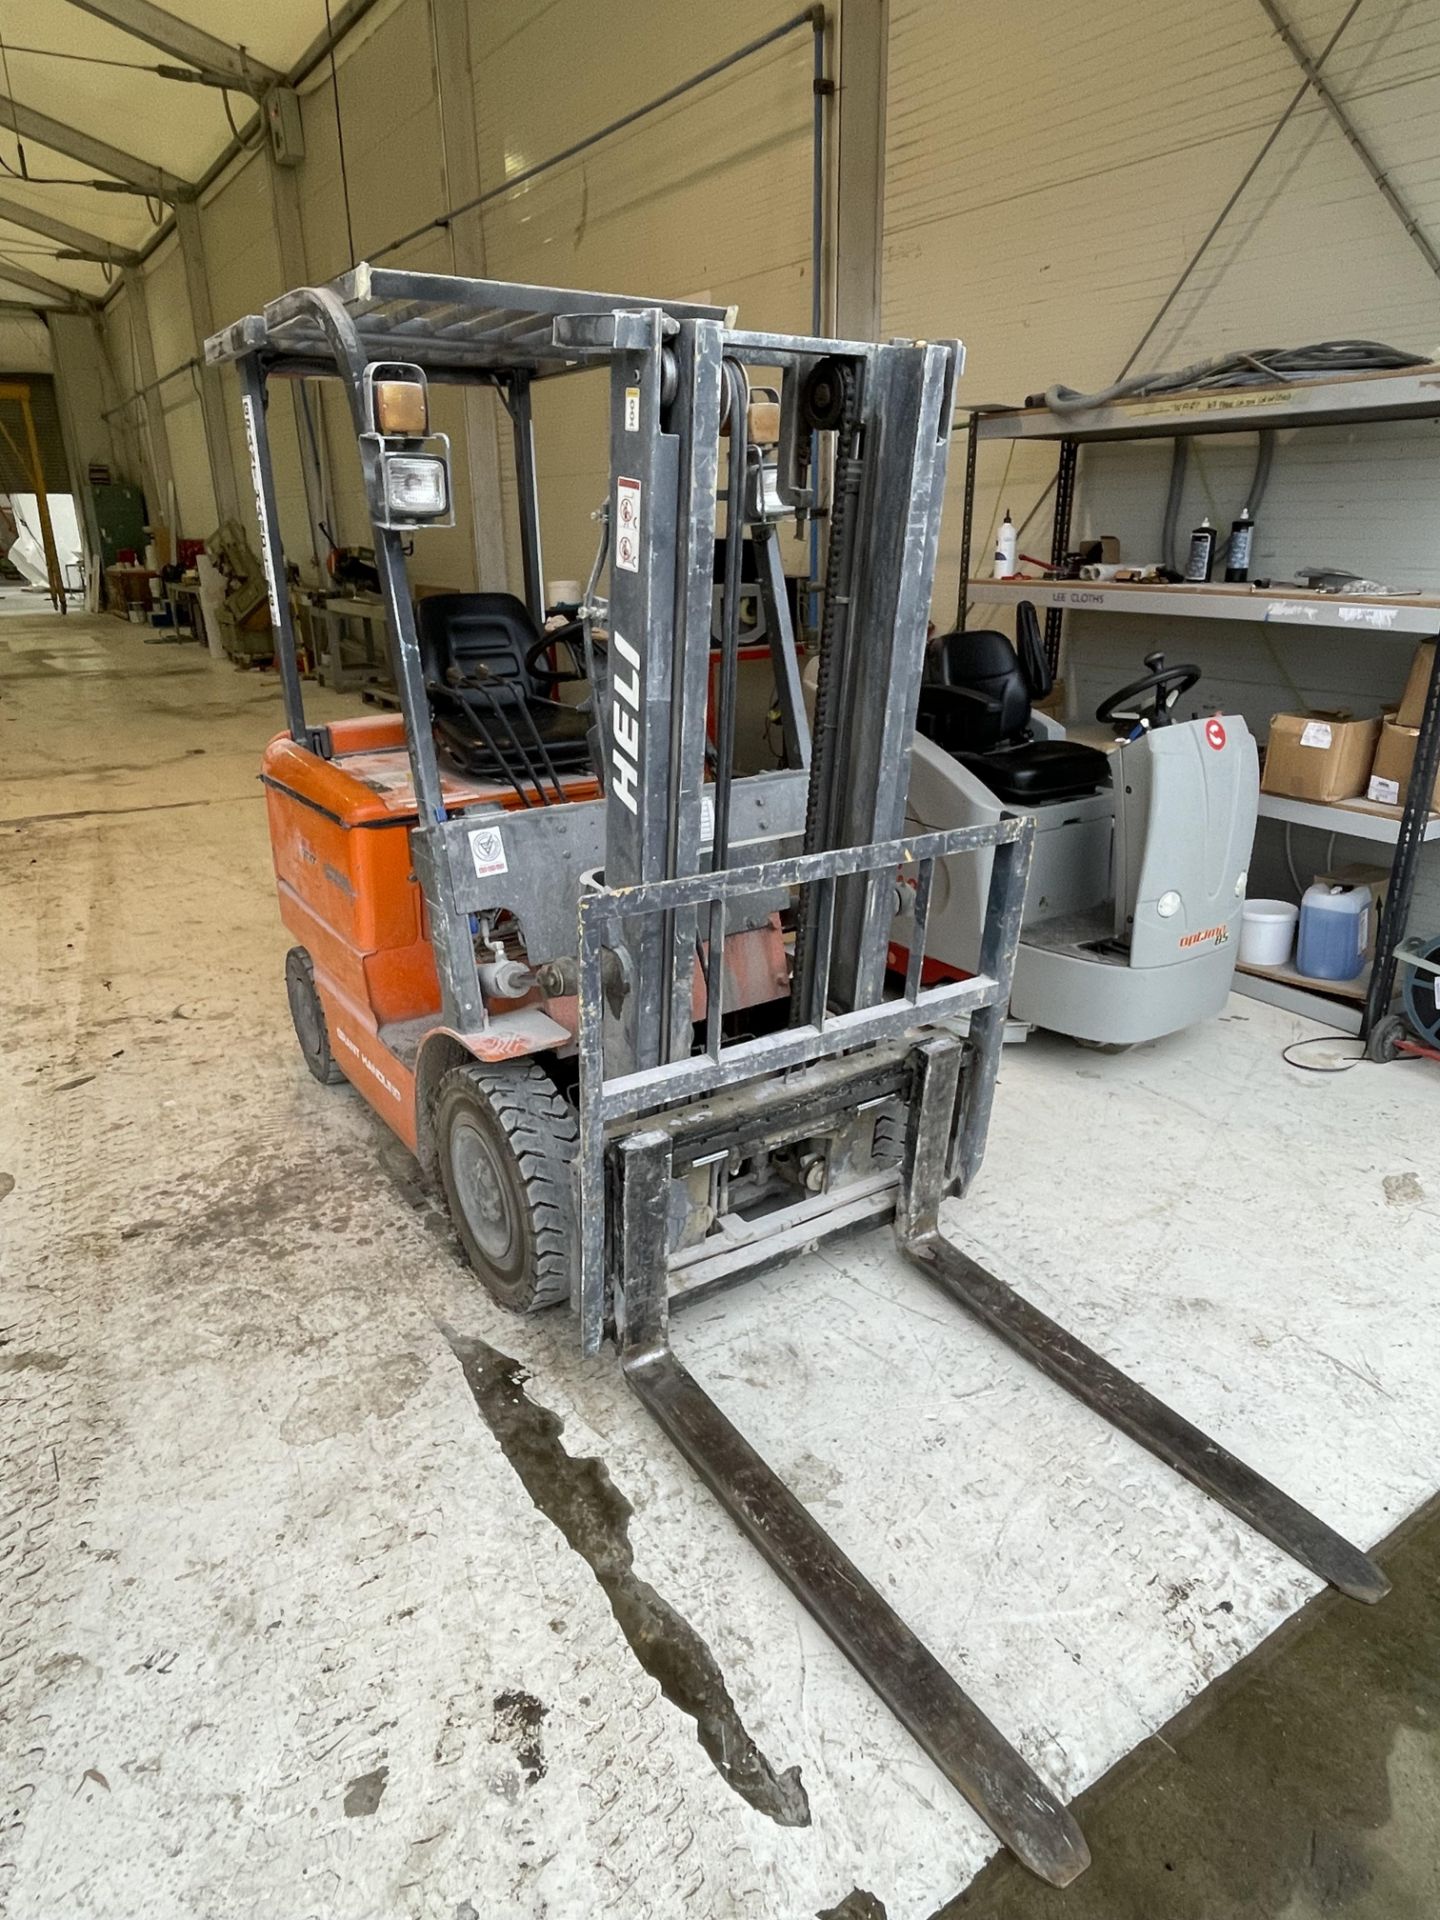 2008 Heli Model HBF15 1500KG Rated Electric Doubemast Forklift S/No. E3611, Odometer Reading: 1279 - Image 3 of 14